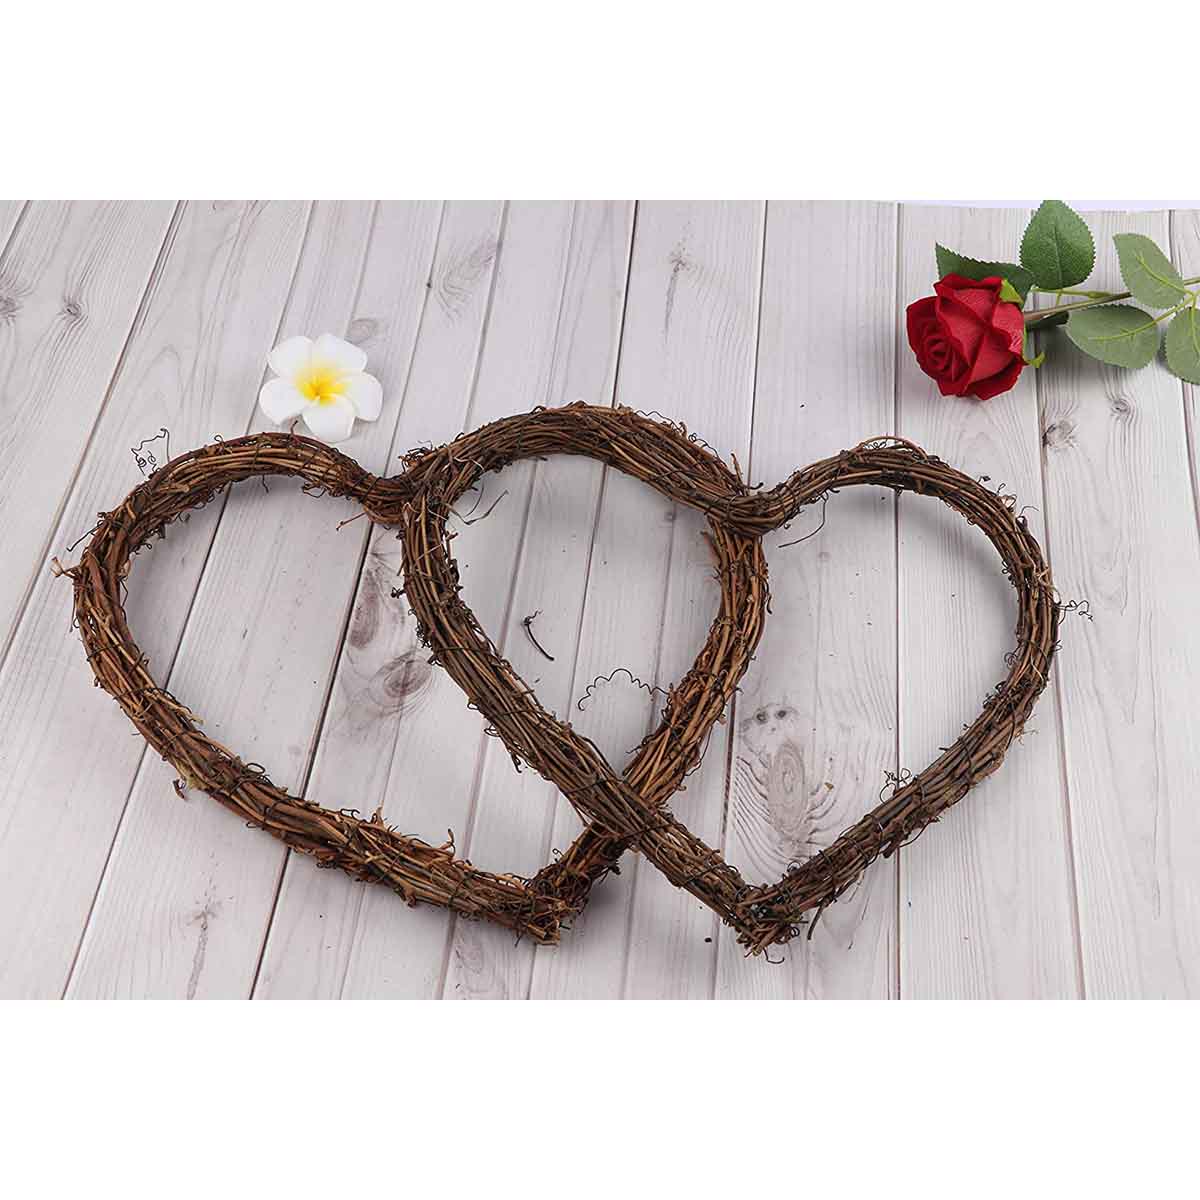 4 Pack Natural Grapevine Heart Wreaths